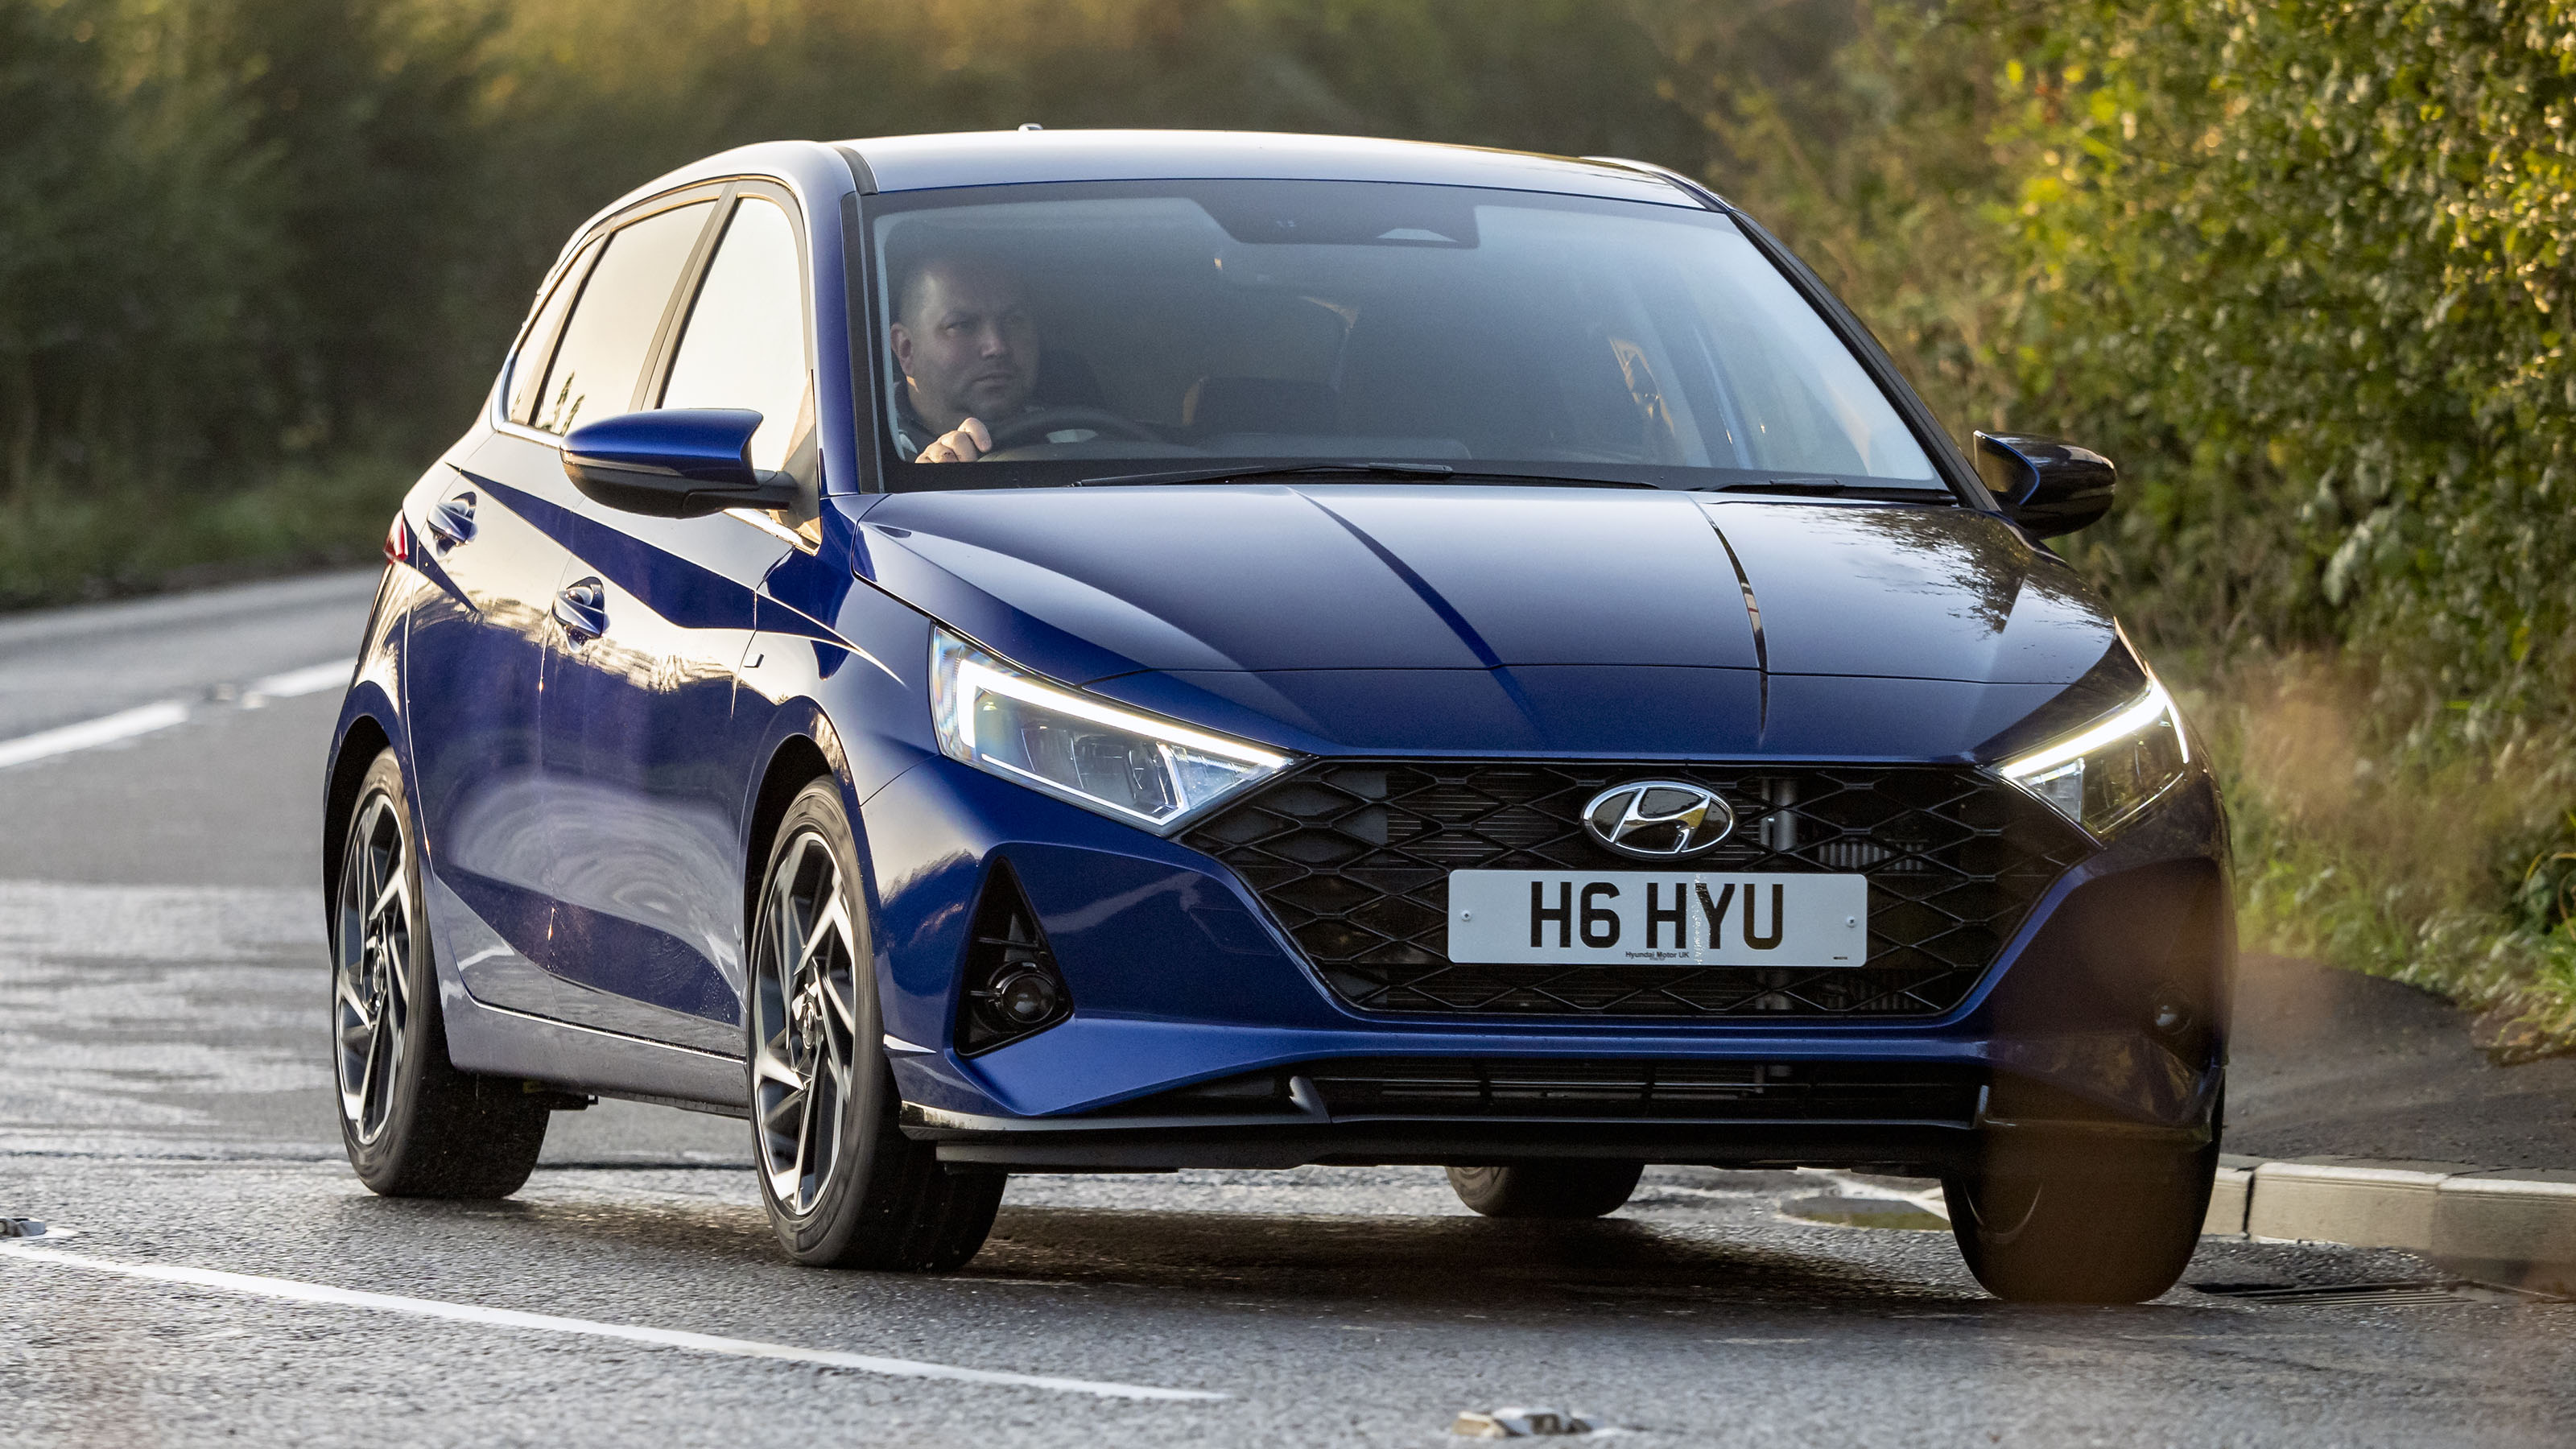 2020 Hyundai i20 hatchback prices, specs and release date